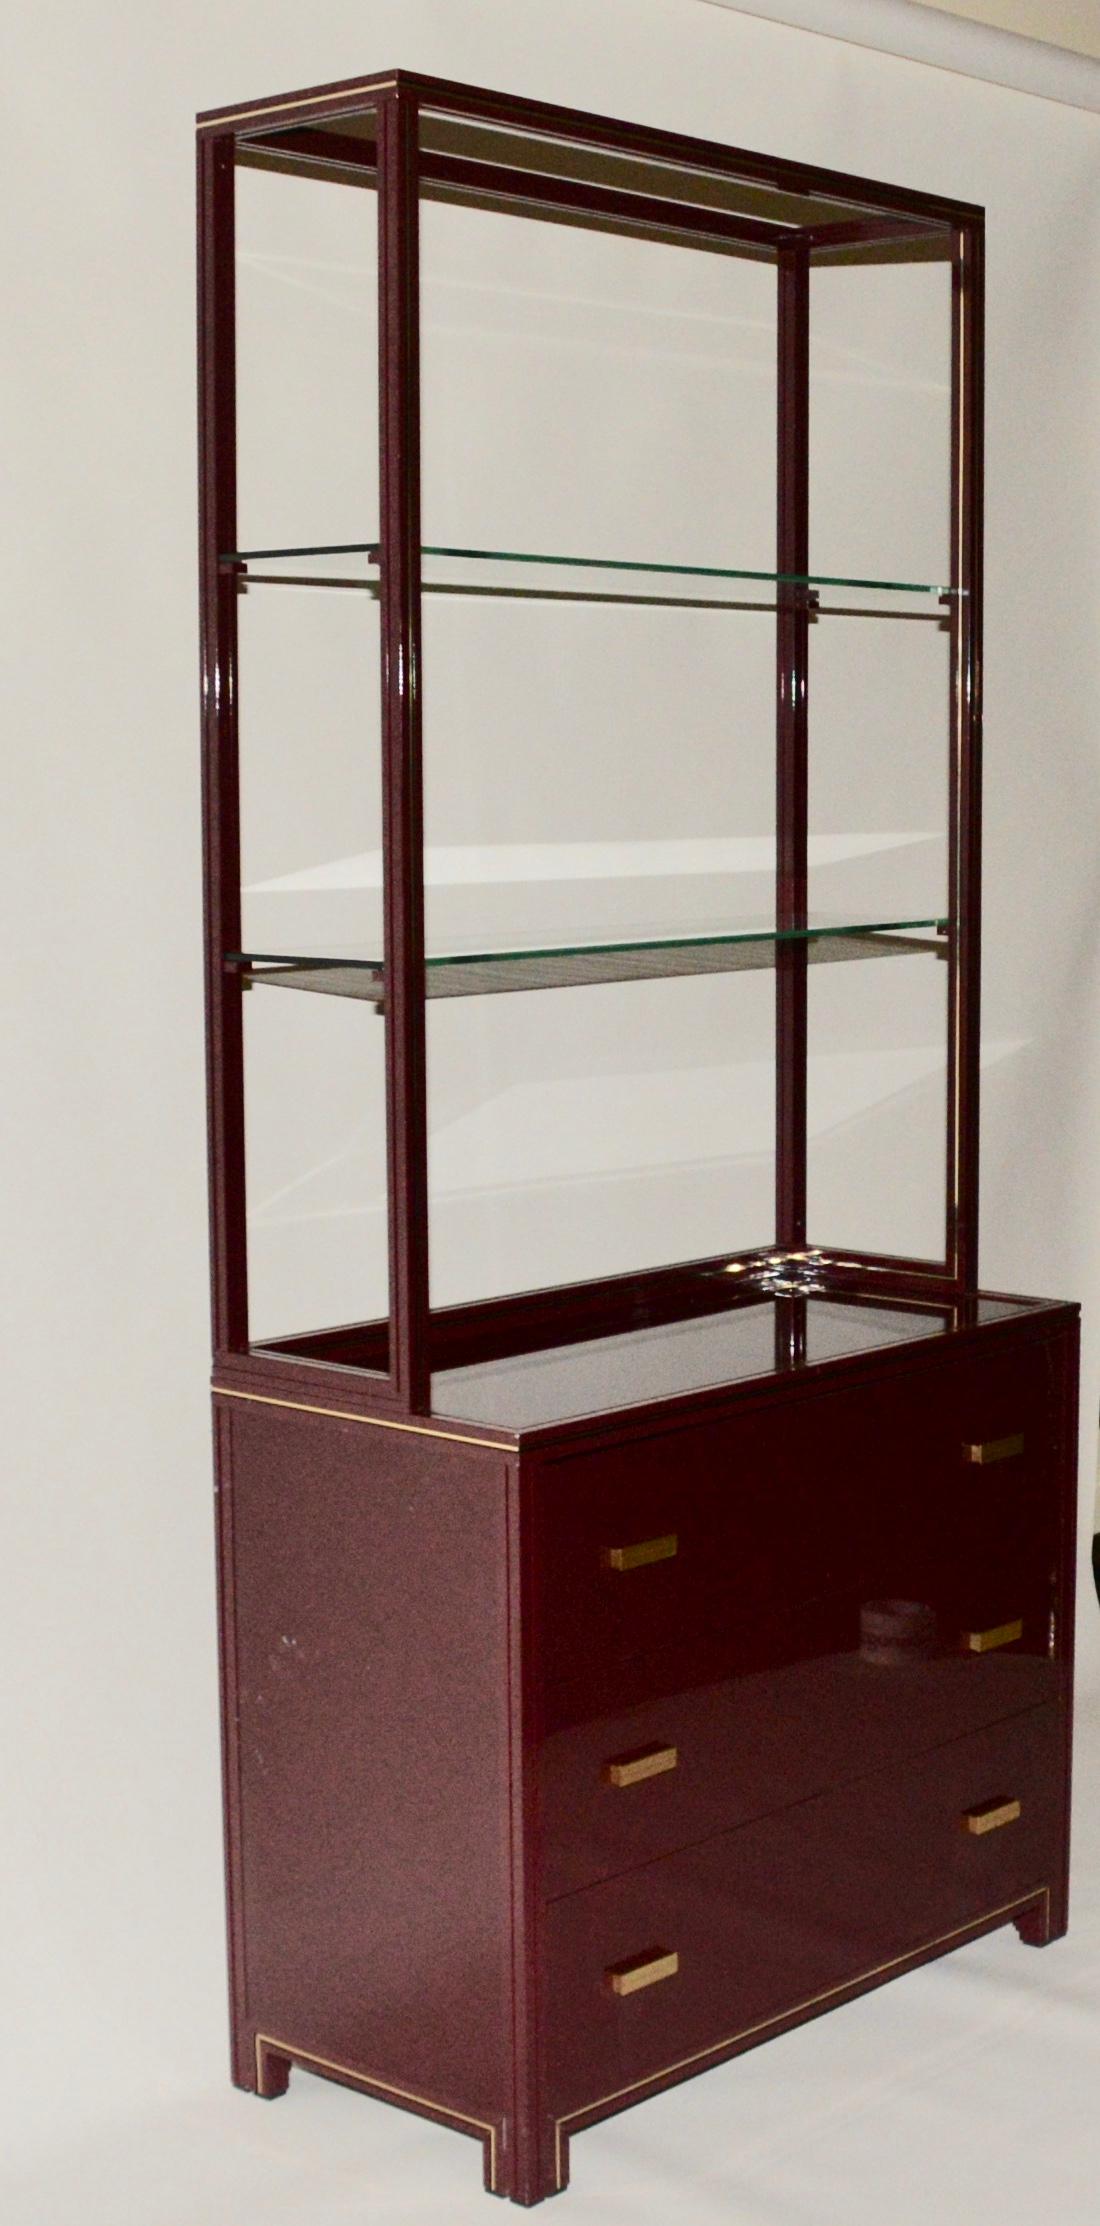 Vintage Pierre Vandel cabinet with three draws and two glass shelves on top in a burgundy gloss finish. A fabulous item by the iconic French designer Pierre Vandel whose designs are well documented in design literature and are still in high demand